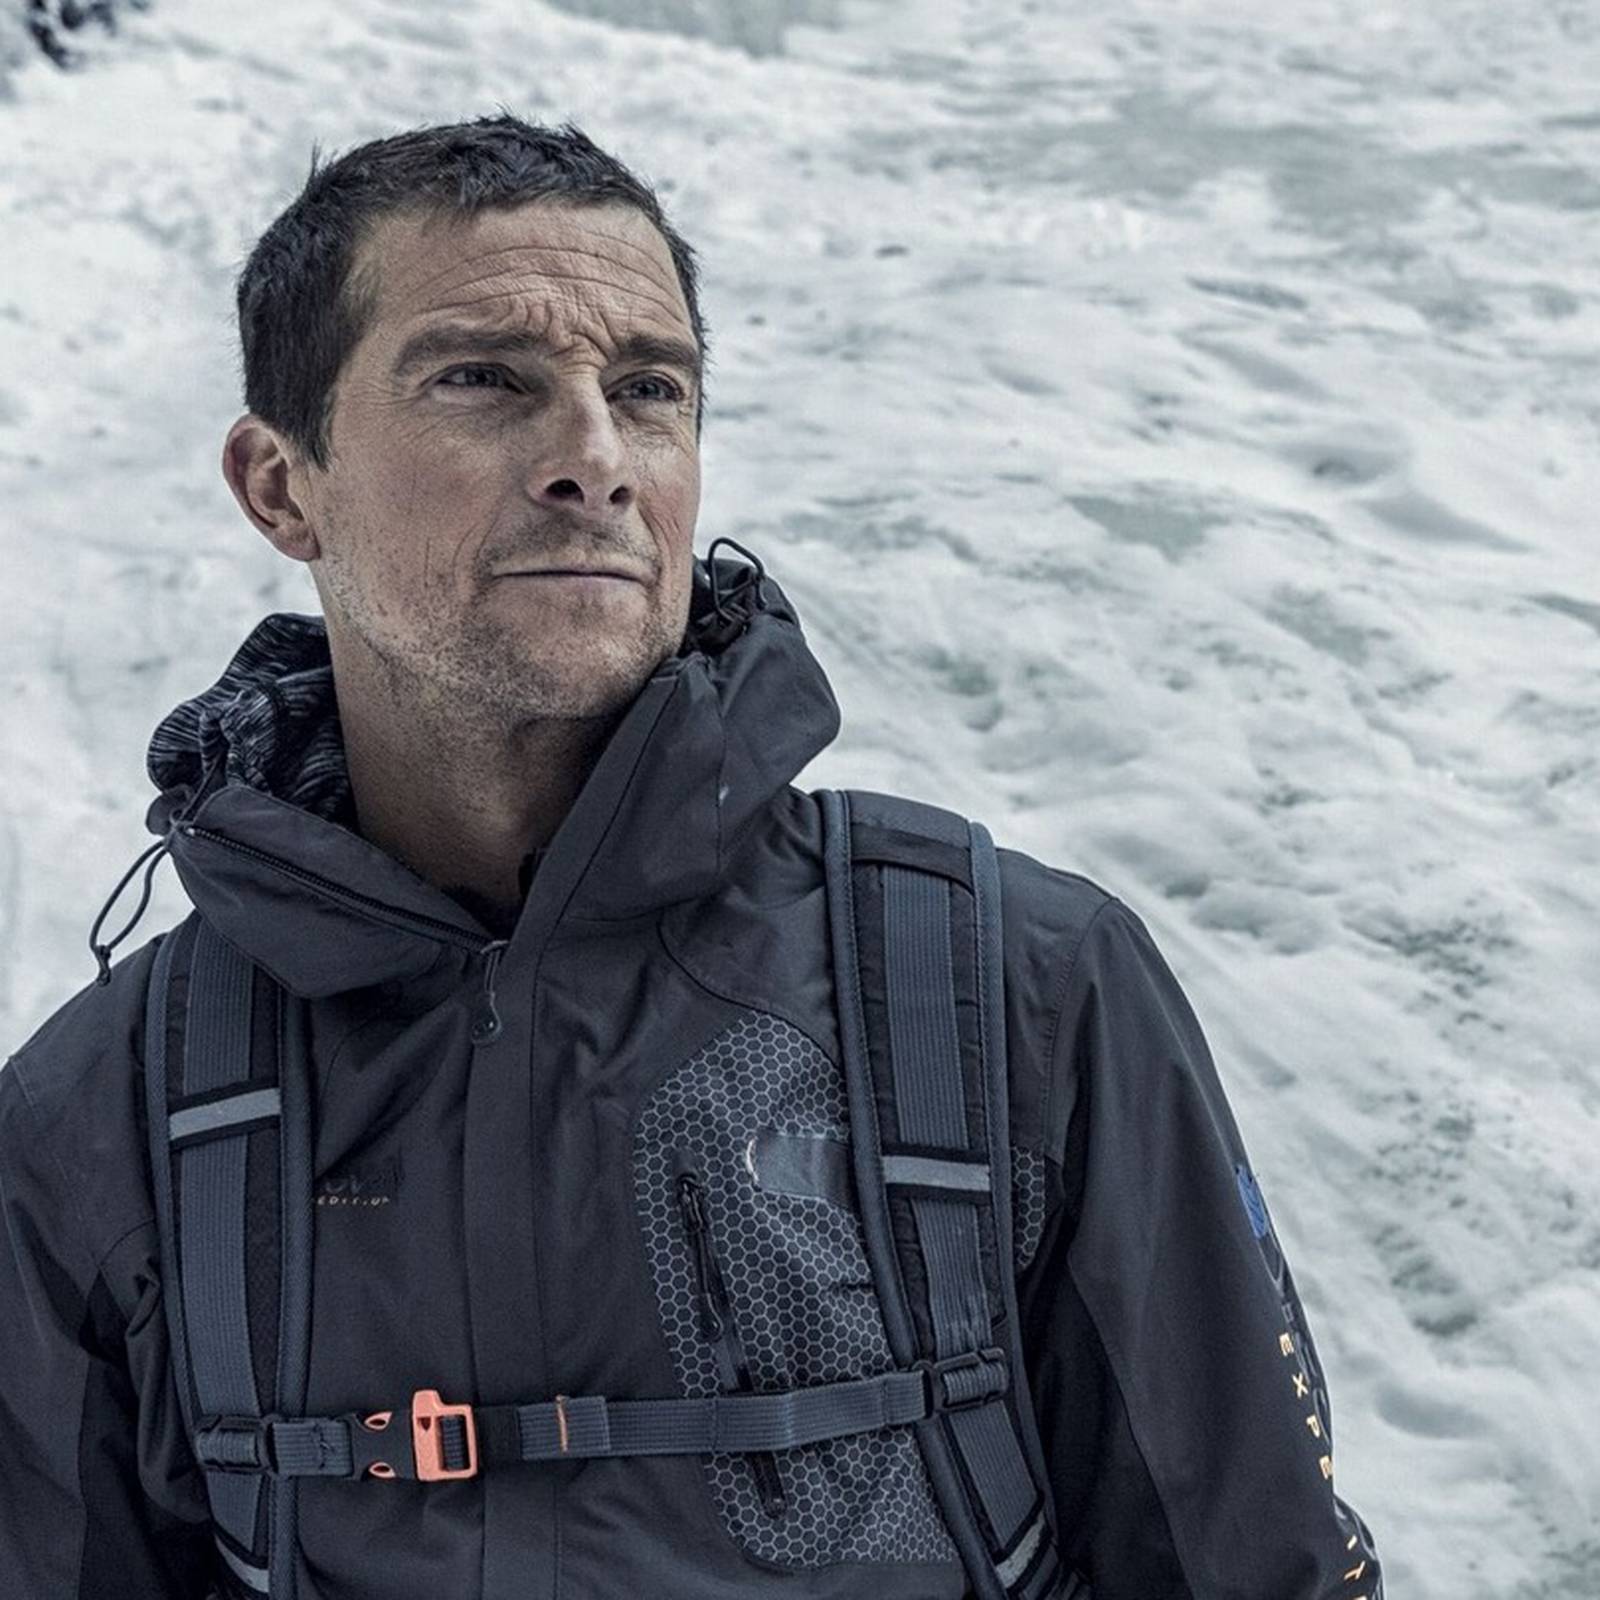 Bear Grylls: 'It's simple to live well, but most people don't